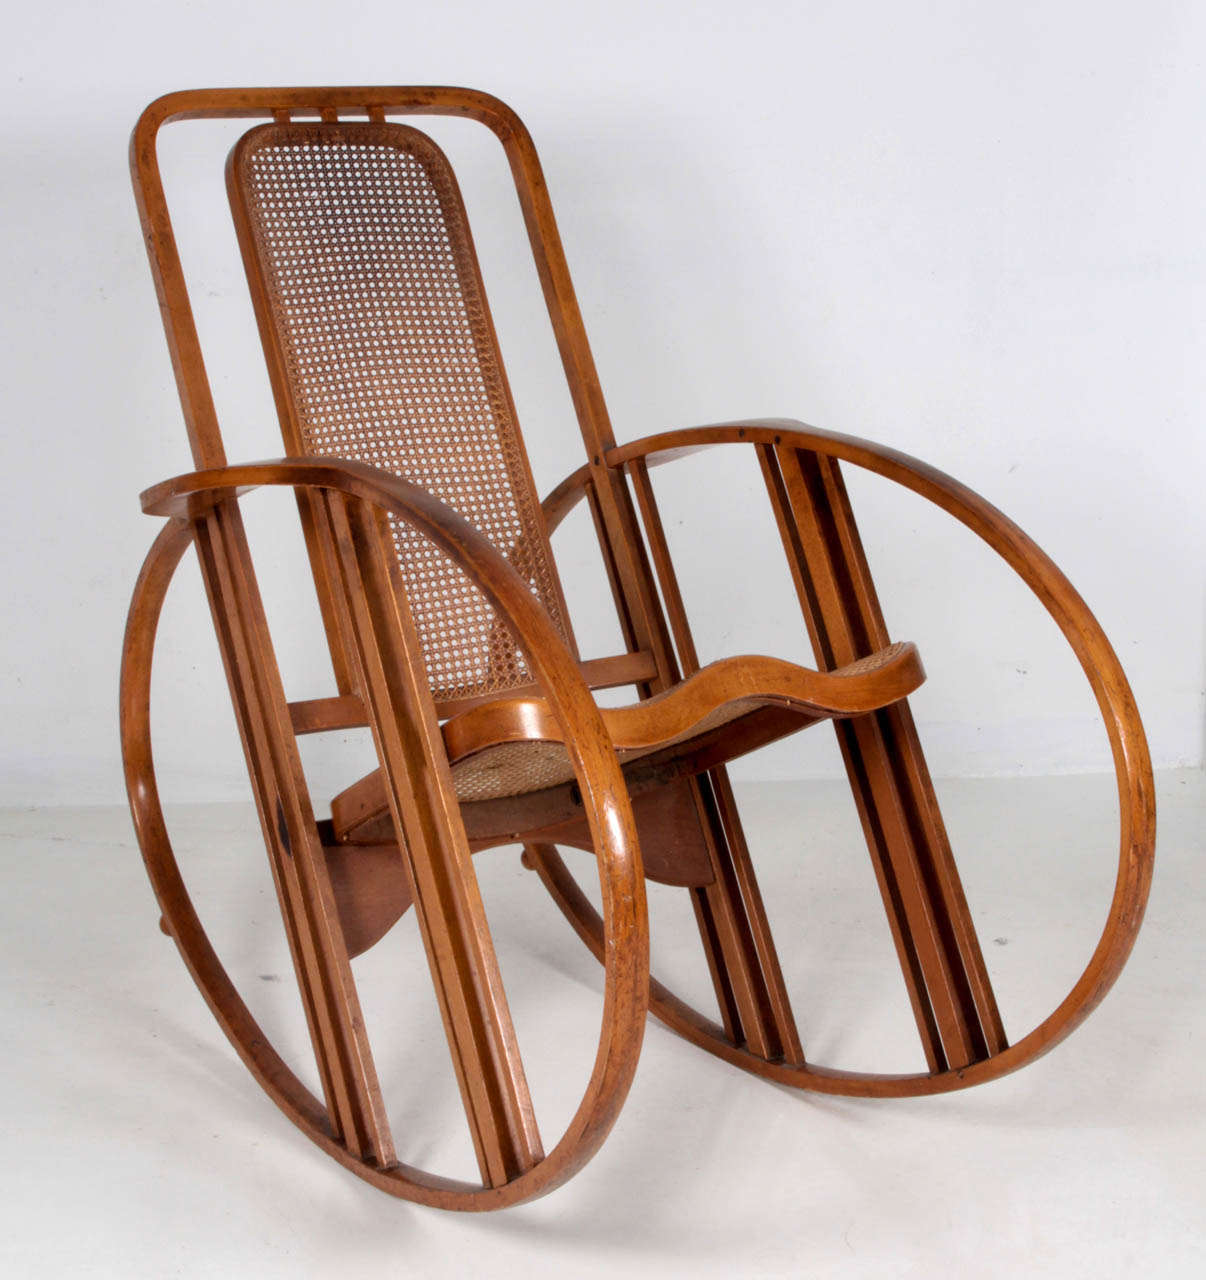 Antonio Volpe, Italy
Josef Hoffmann (attr.)  (1870-1956),  Austria    
Società Anonima, Udine

“Egg” rocking chair, circa 1920.

Steam bent beech with a natural patina, original caned seat  and back, Model No. 267

Marks: branded logo